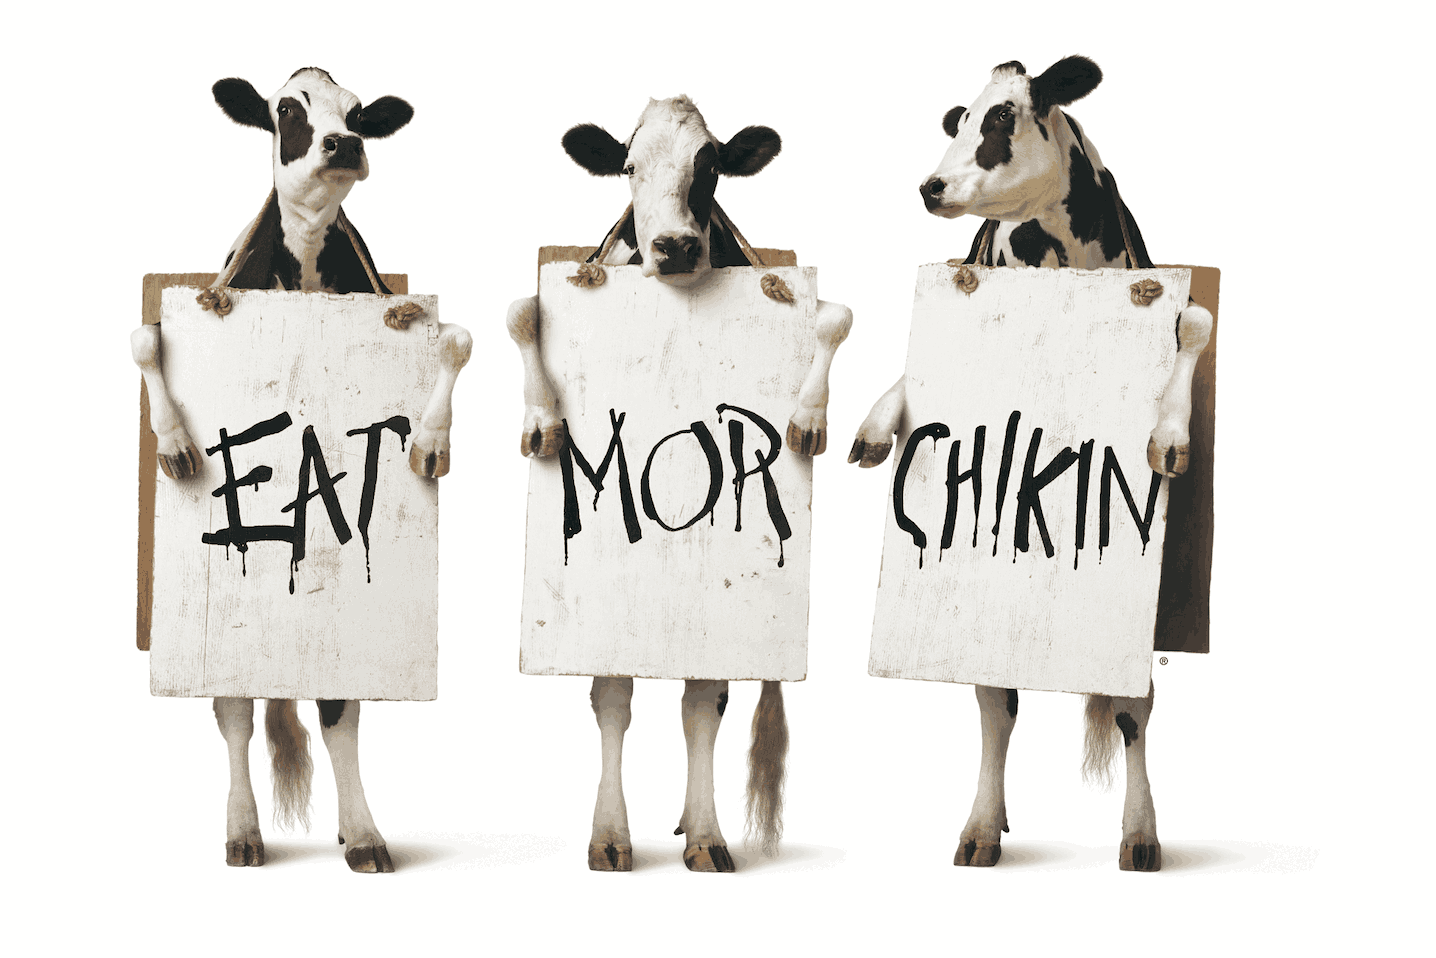 3 Chick-fil-A Cows holding signs that read “Eat More Chikin”